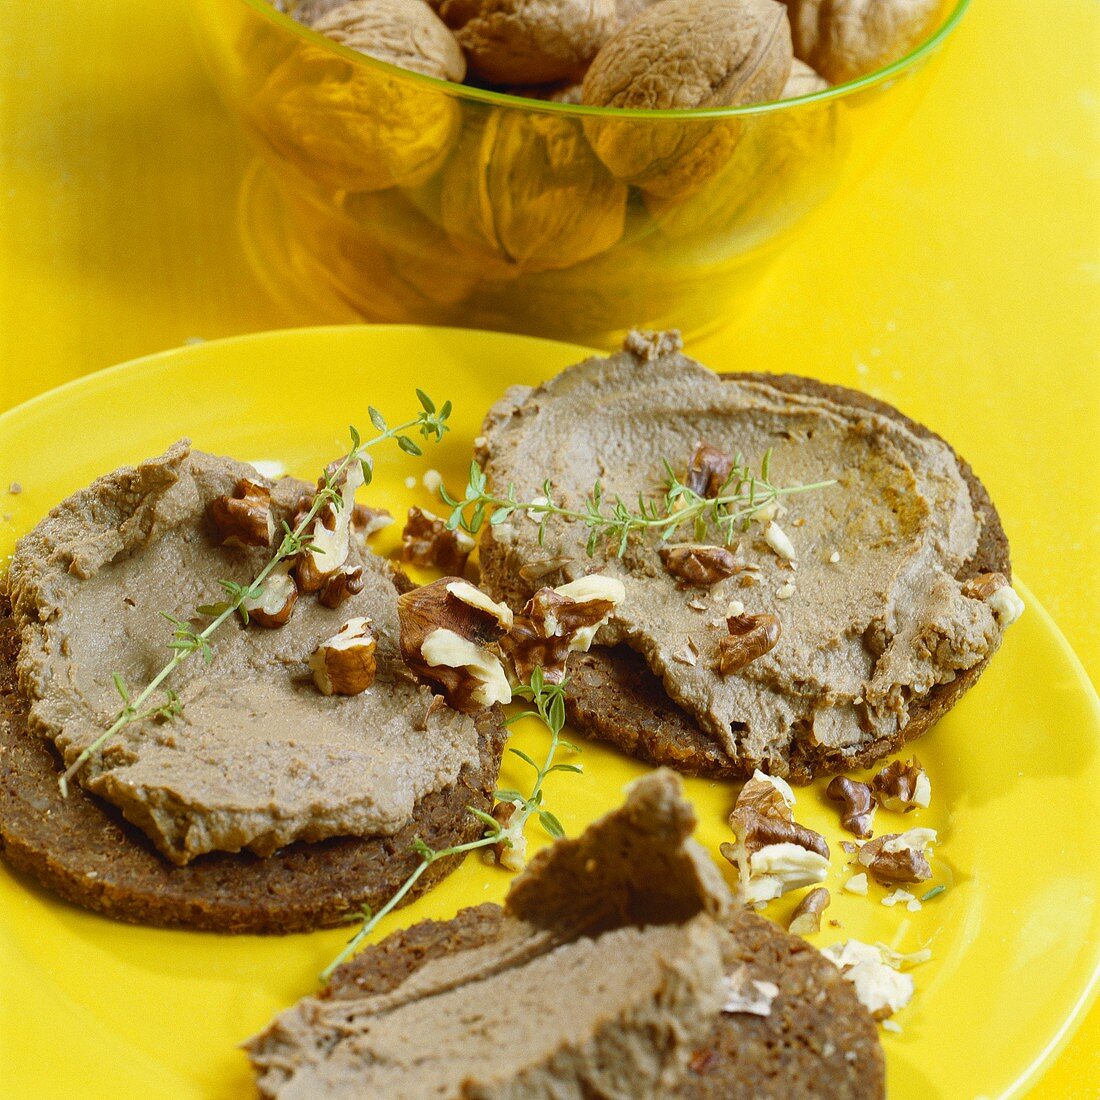 Chopped liver with nuts on wholemeal bread